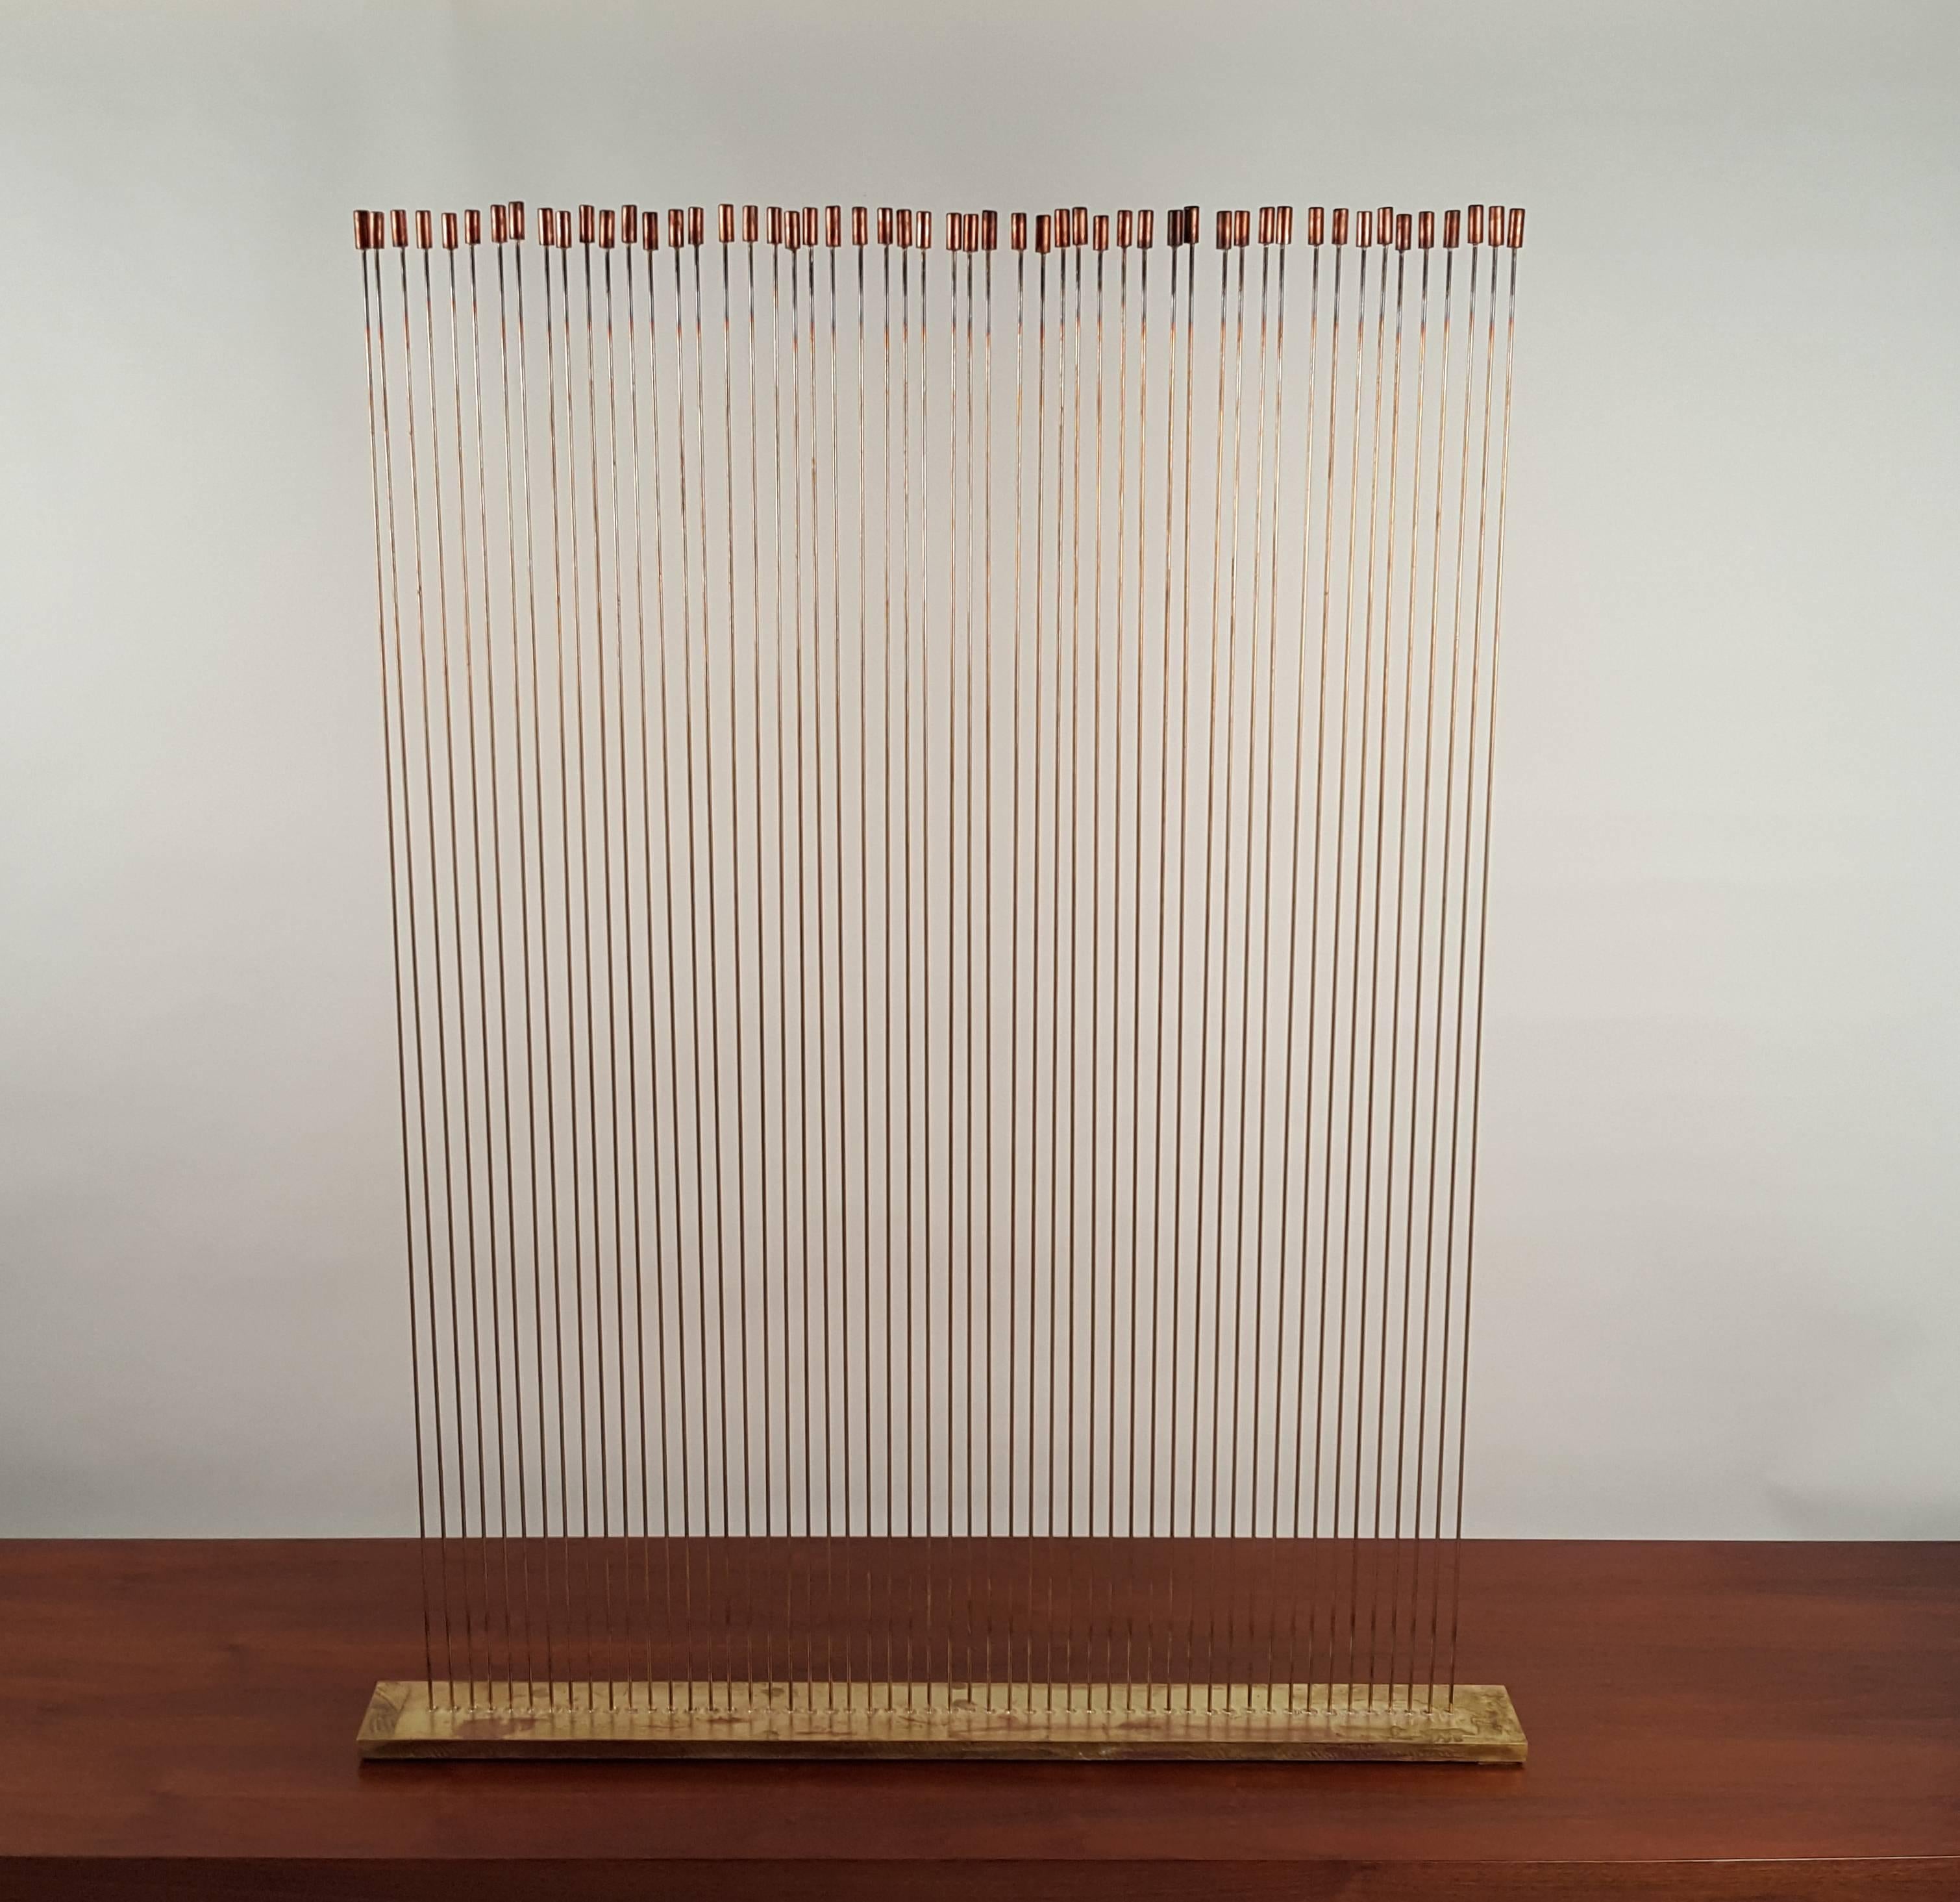 Amazing large-scale Val Bertoia 'Sonambient' interactive kinetic sound sculpture in brass and copper. This is a one of a kind sculpture handmade by Val himself at Bertoia Studios. Includes “Certificate of Authenticity”.
      